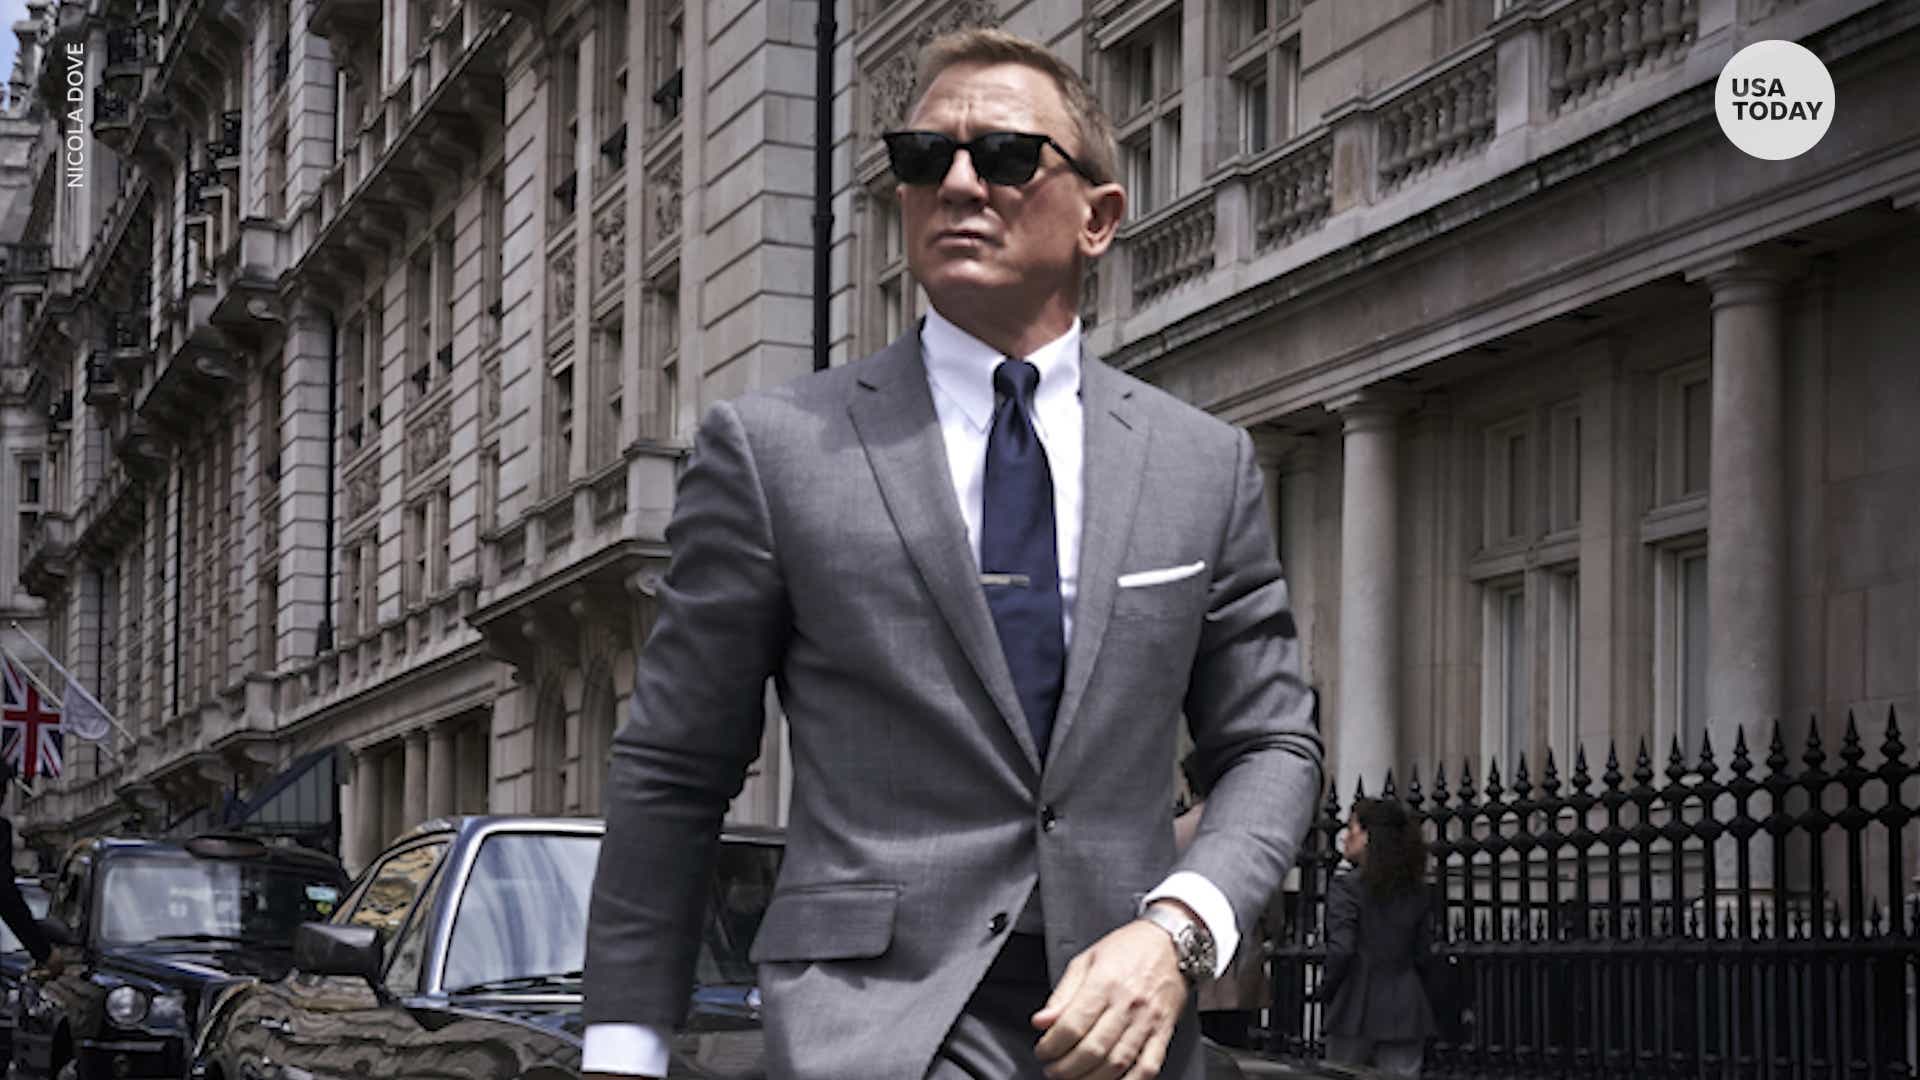 James Bond: Daniel Craig's latest 007 movie is titled 'No Time to Die'